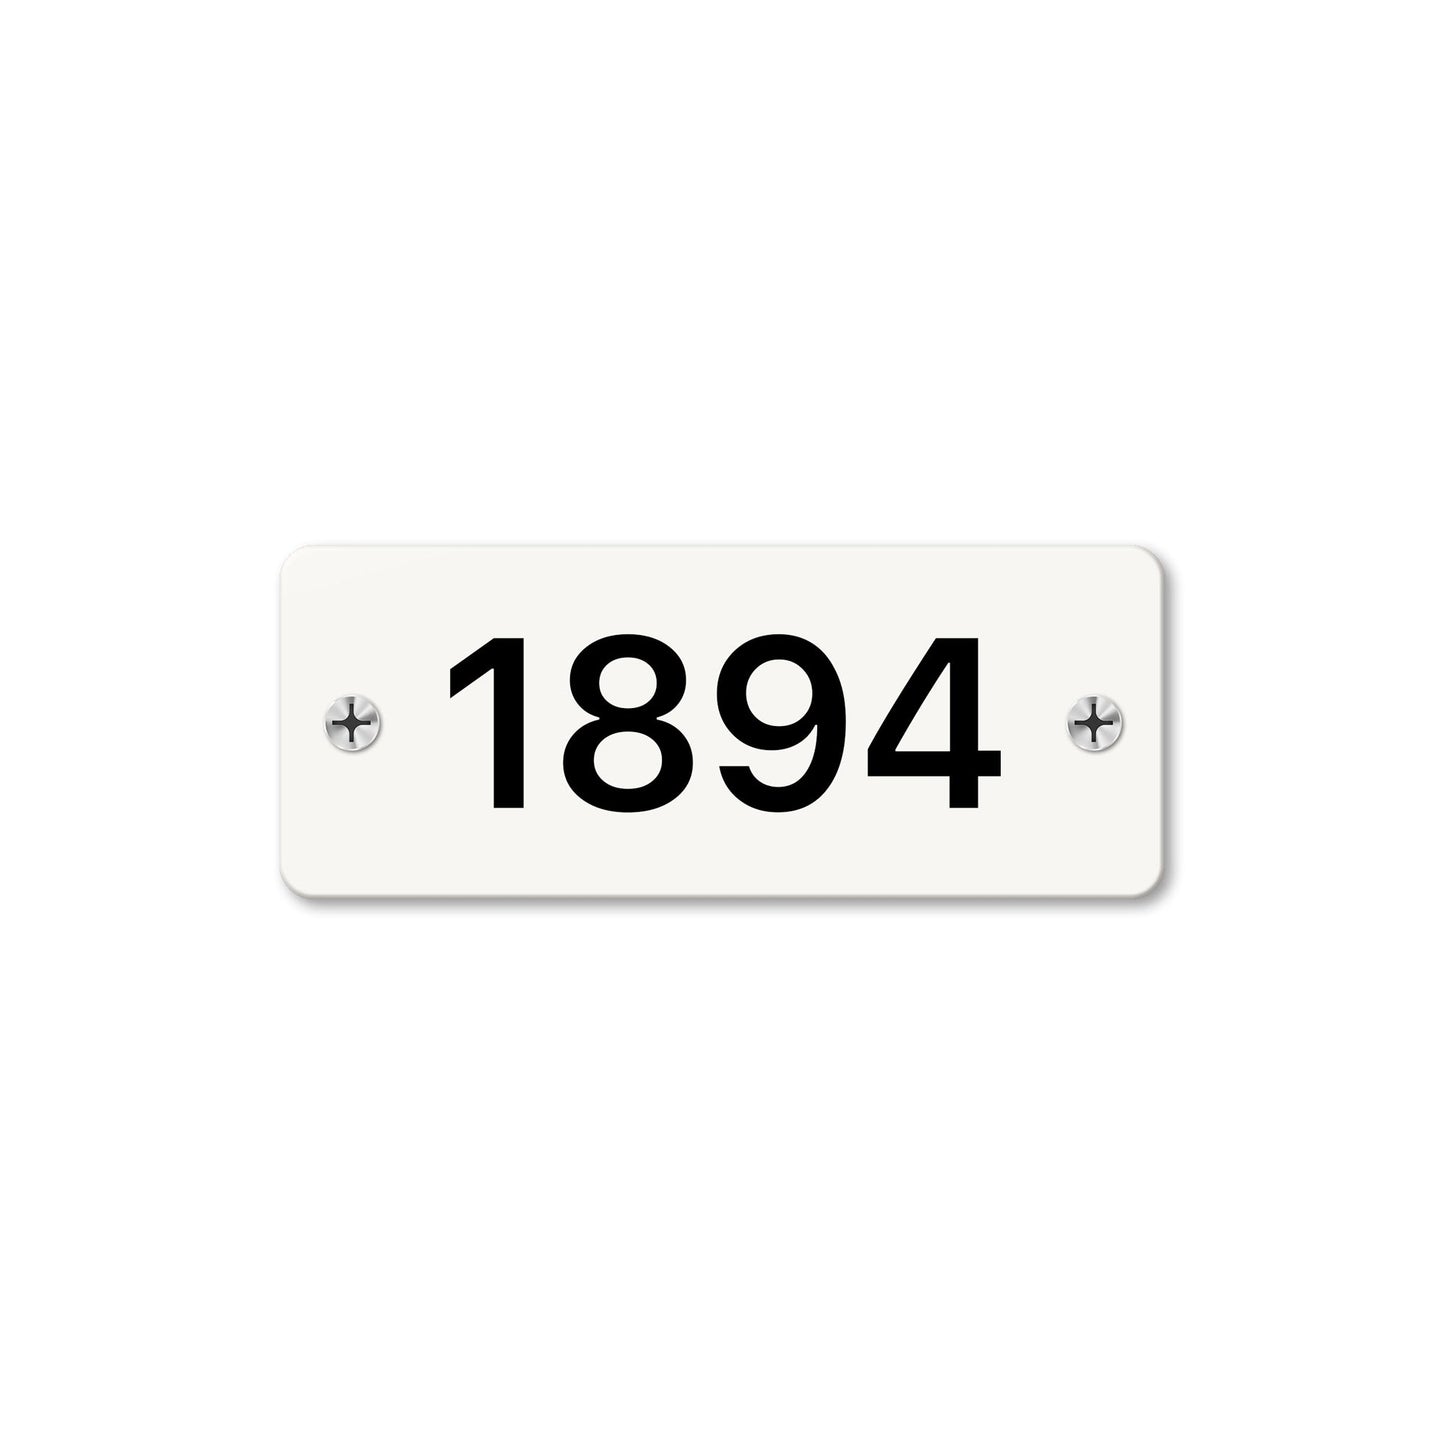 Numeral 1894